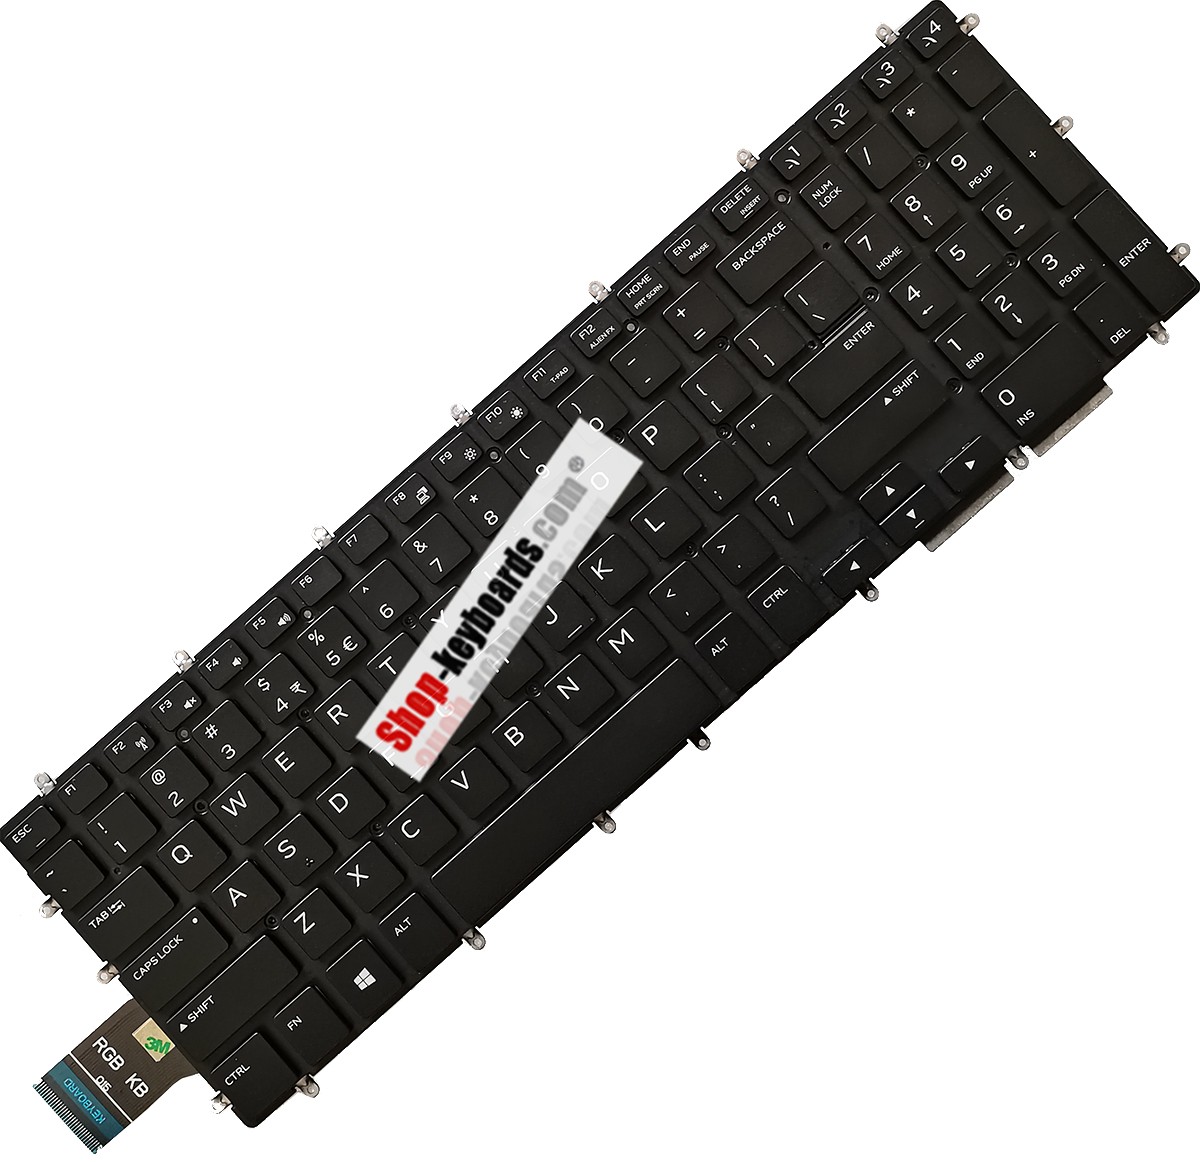 Dell ALW15M-D2739S Keyboard replacement